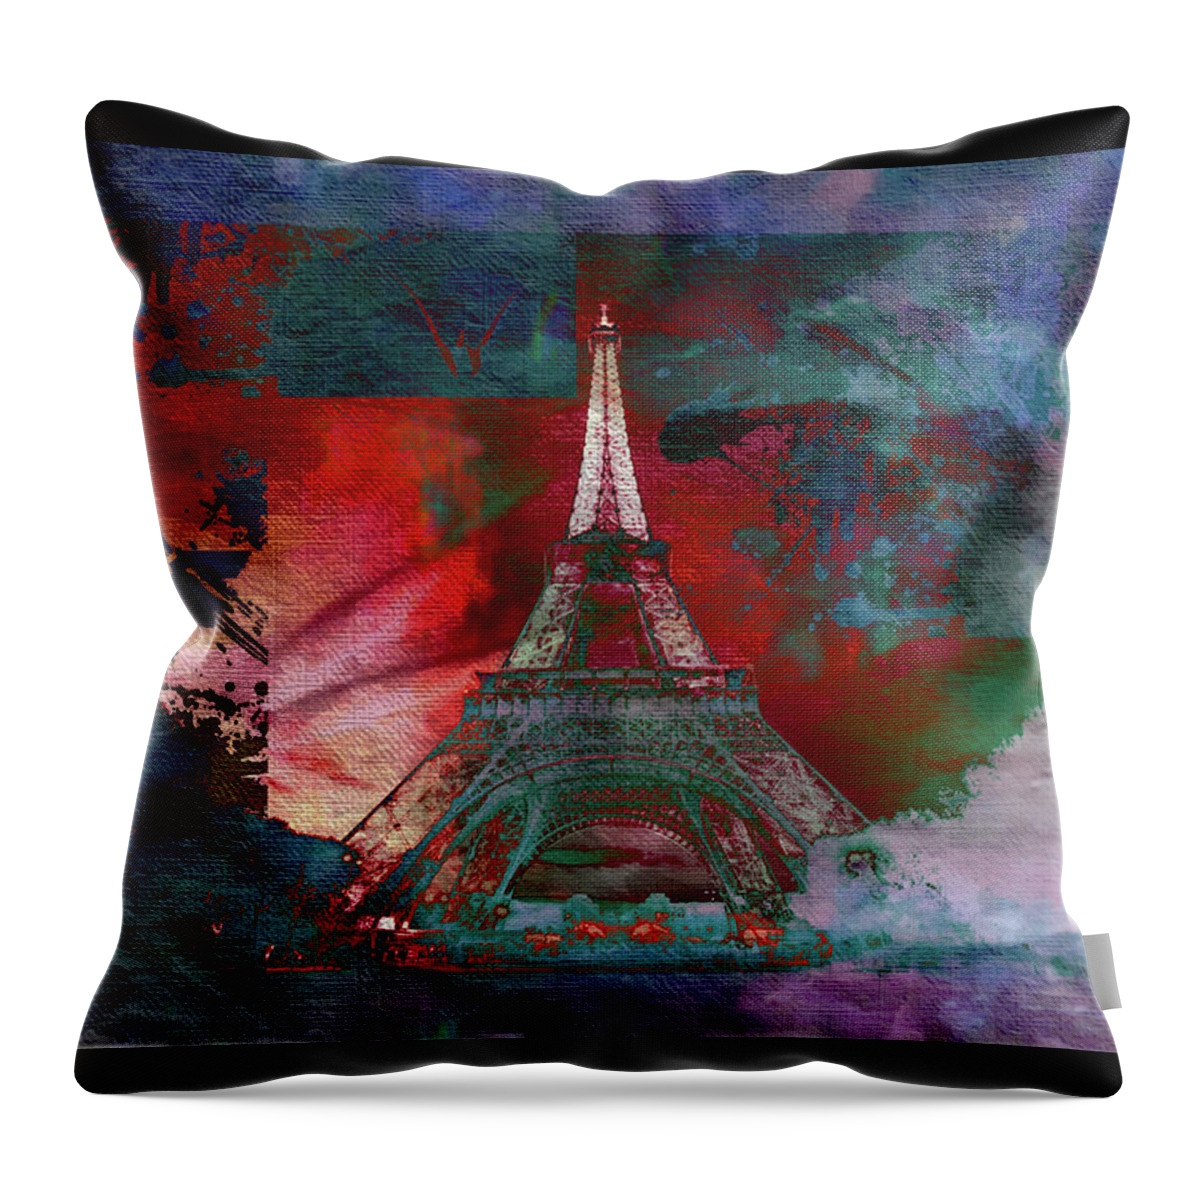 Paris Throw Pillow featuring the mixed media Bastille Day 3 by Priscilla Huber